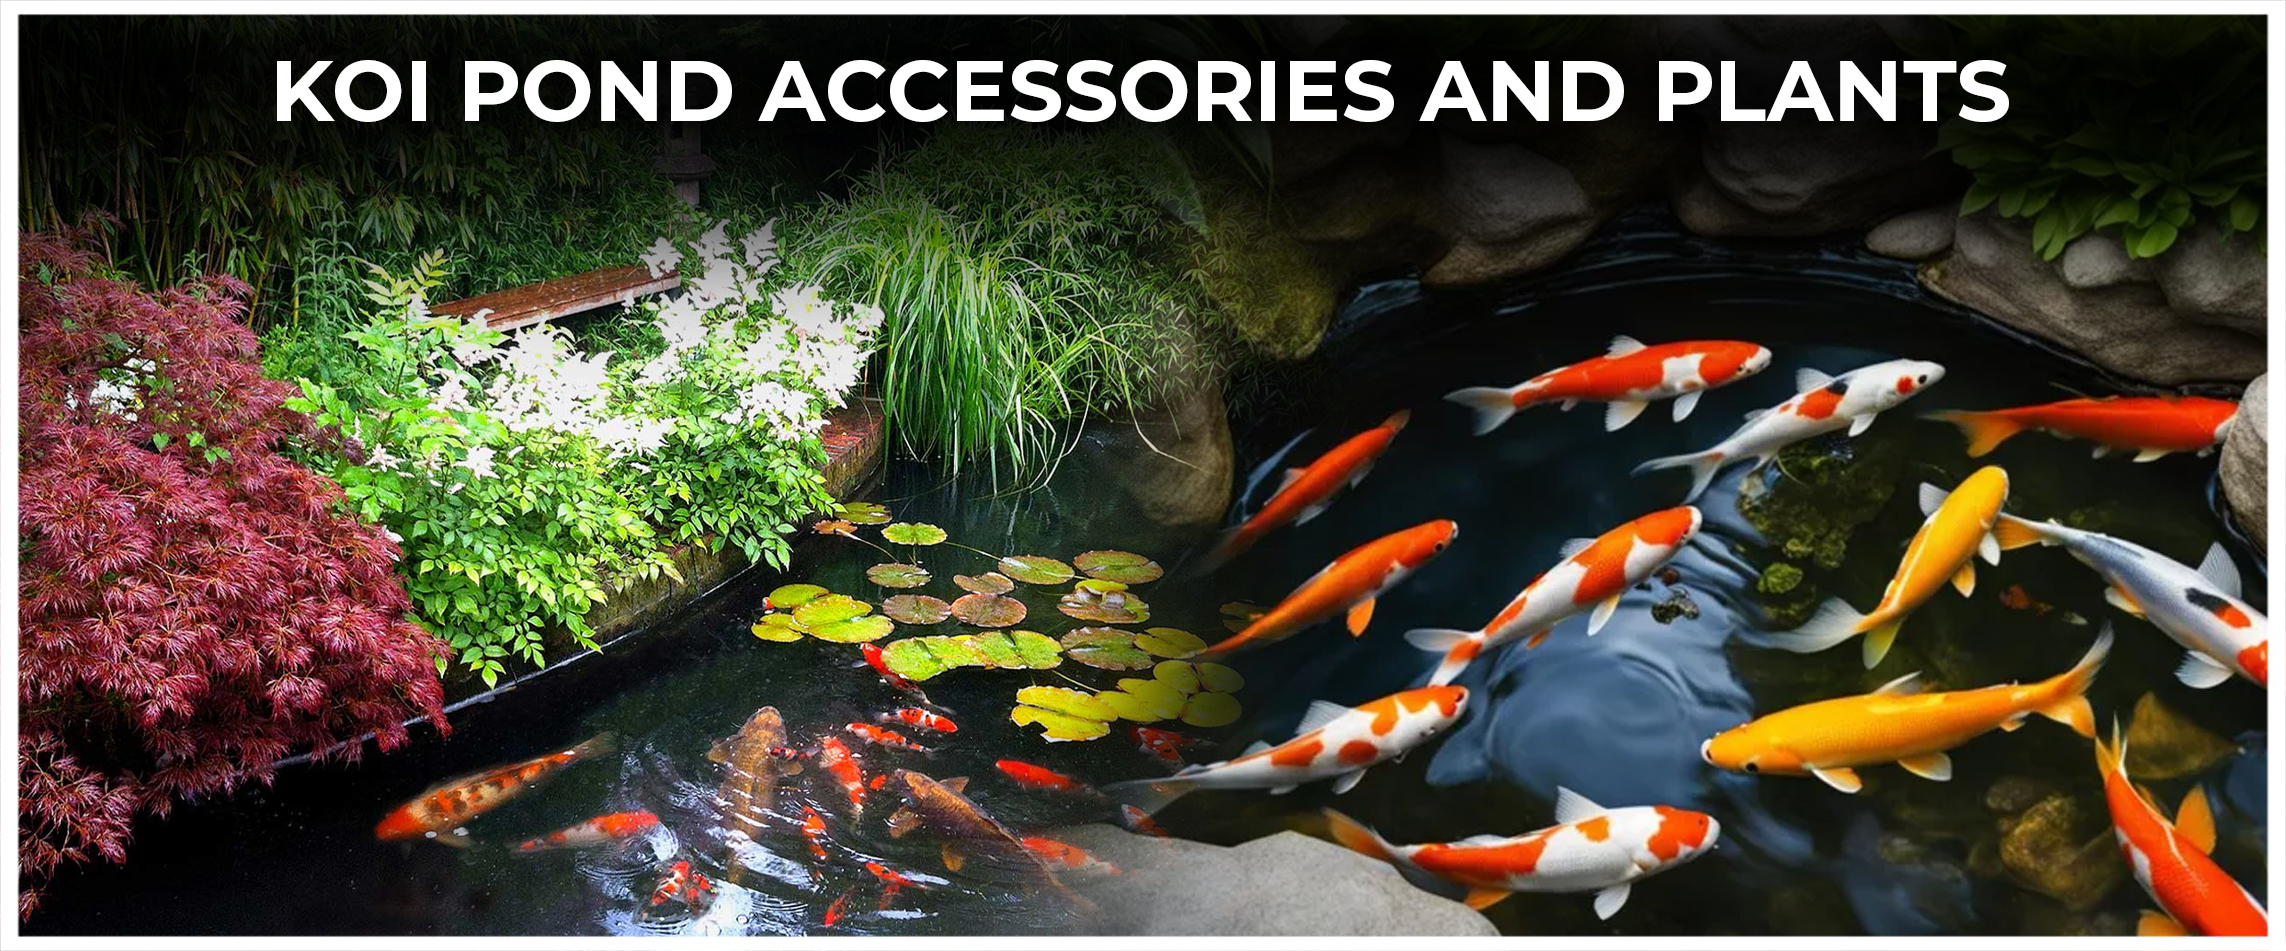 Koi Pond Accessories and Plants